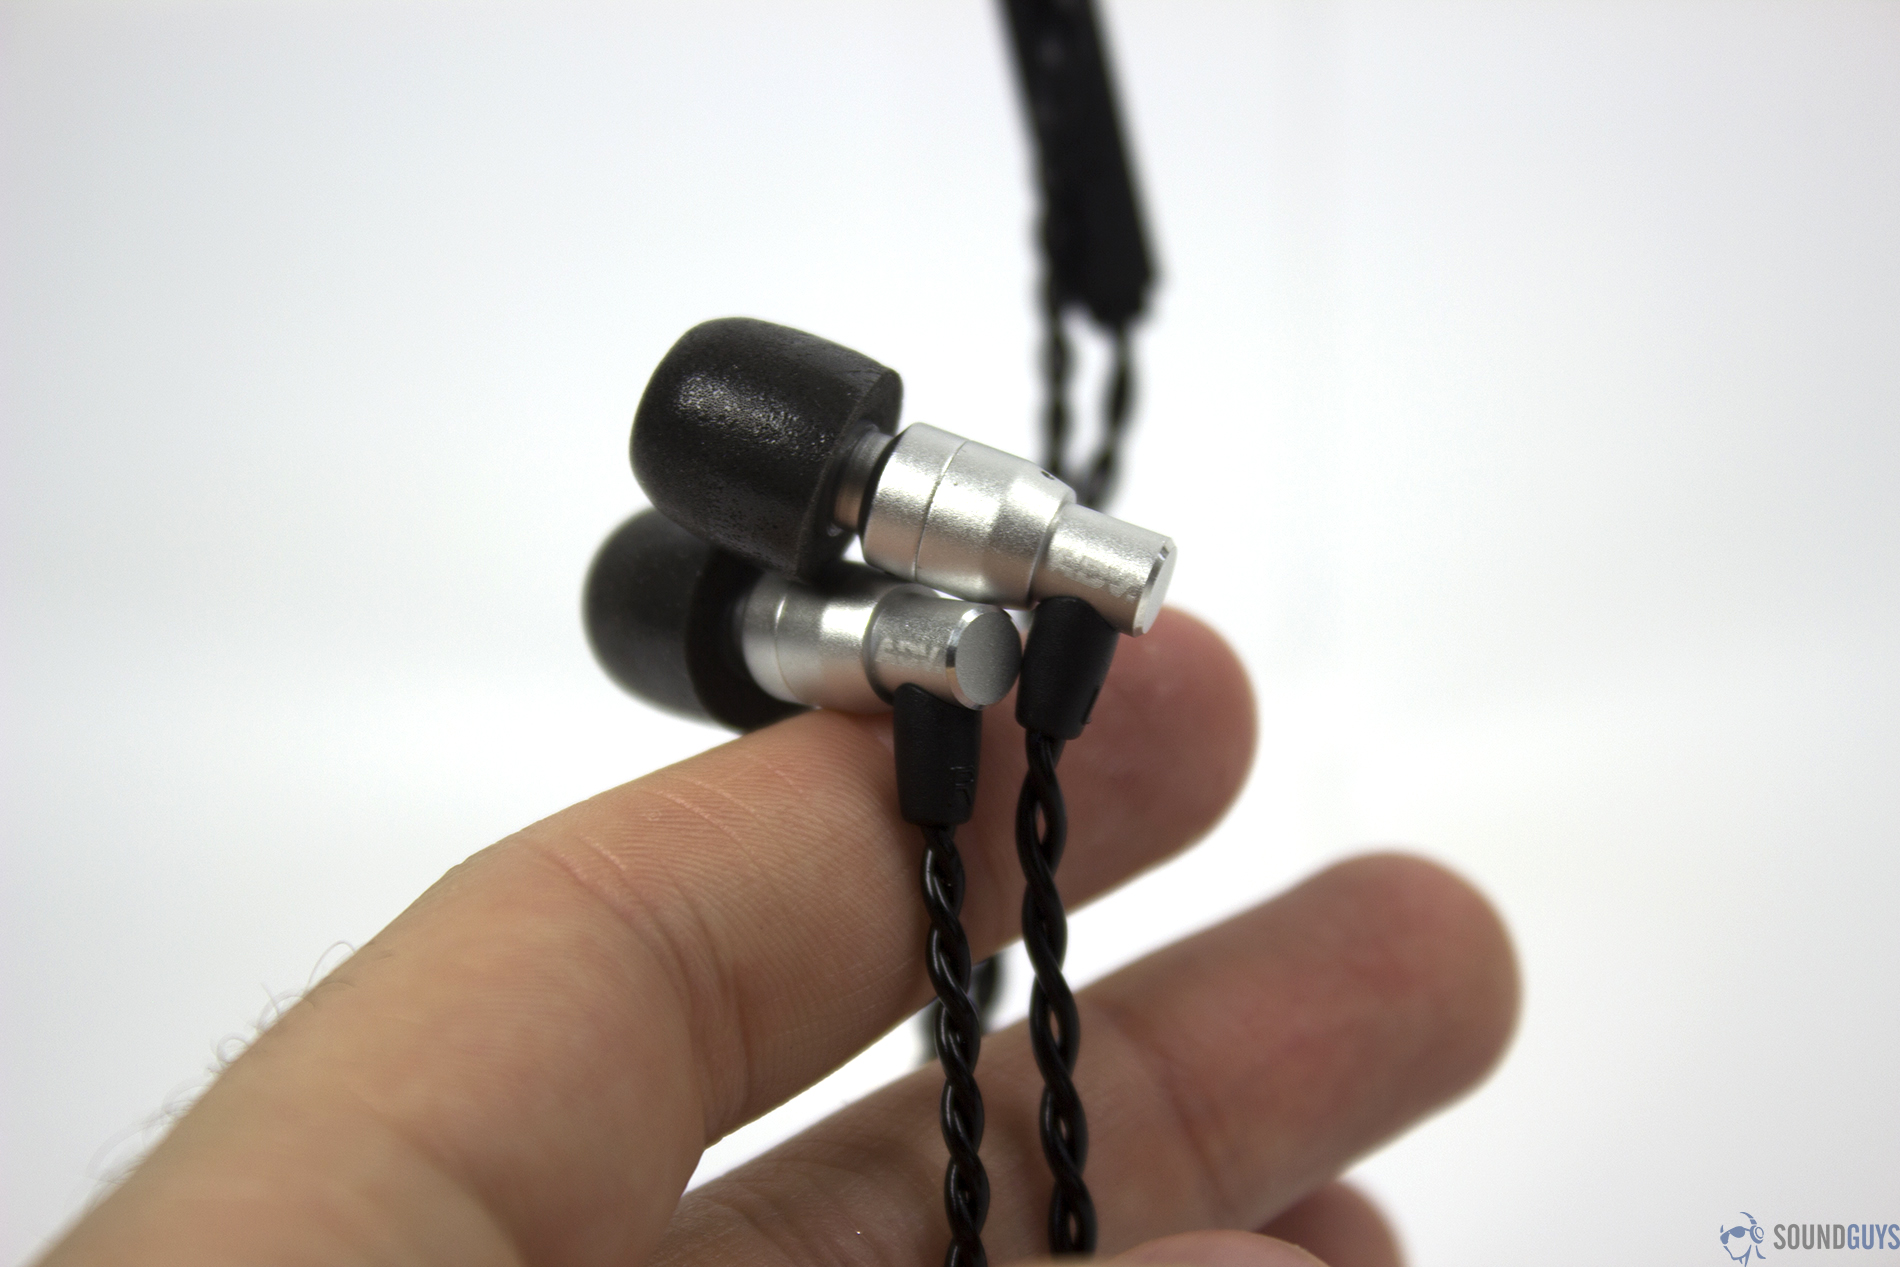 The ADV.SoundM4 earbuds with aluminum housing in the hand on a white backdrop. The ear tips are memory foam.